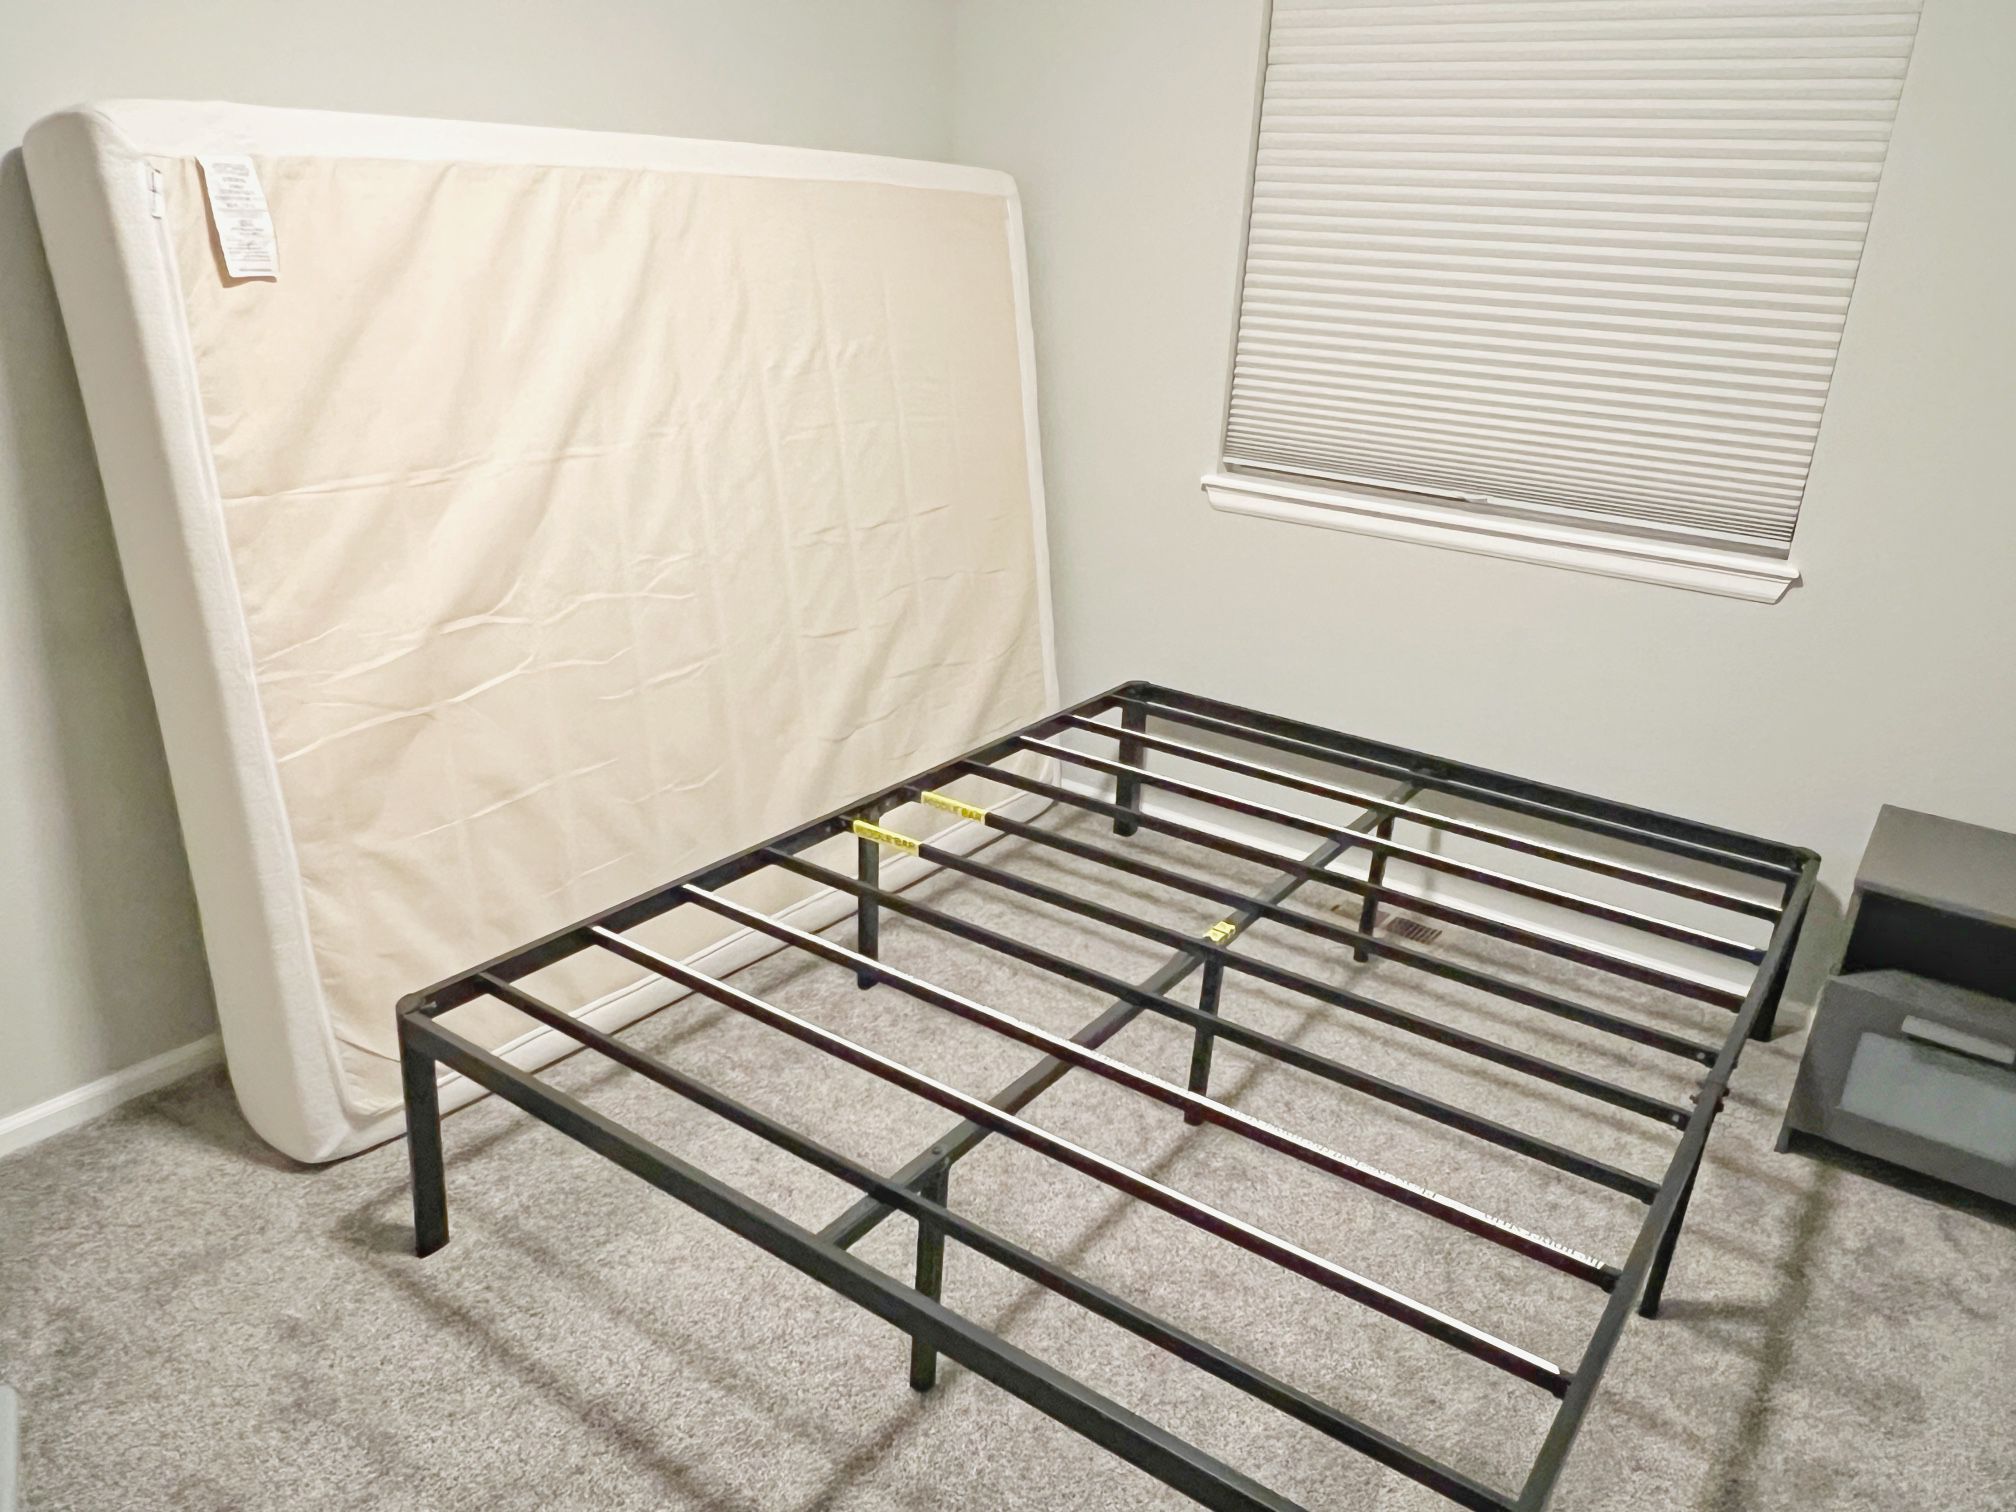 [pending]Free Queen Size Mattress And Bed Frame